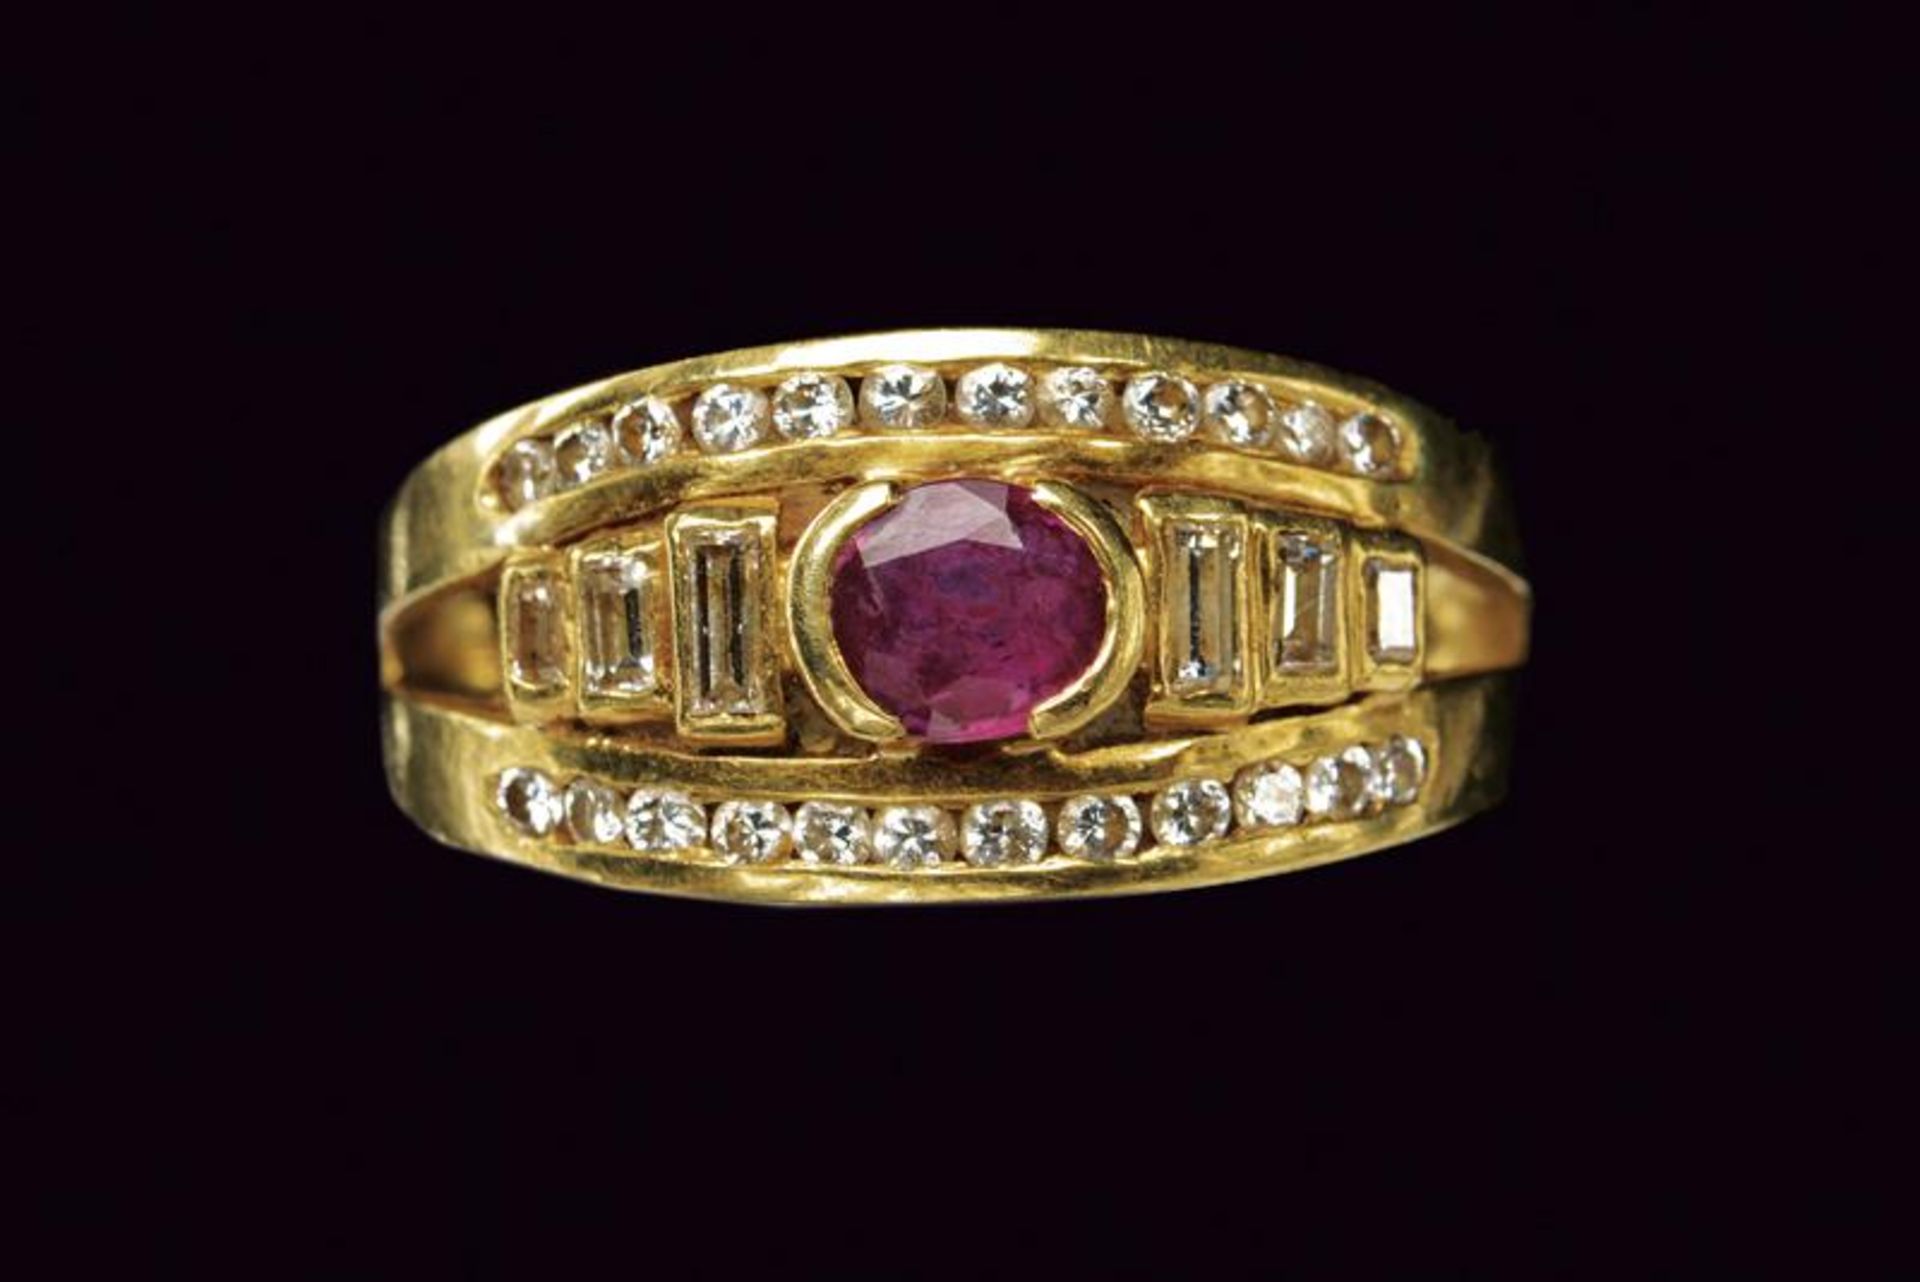 Diamond and ruby gold band ring - Image 3 of 3